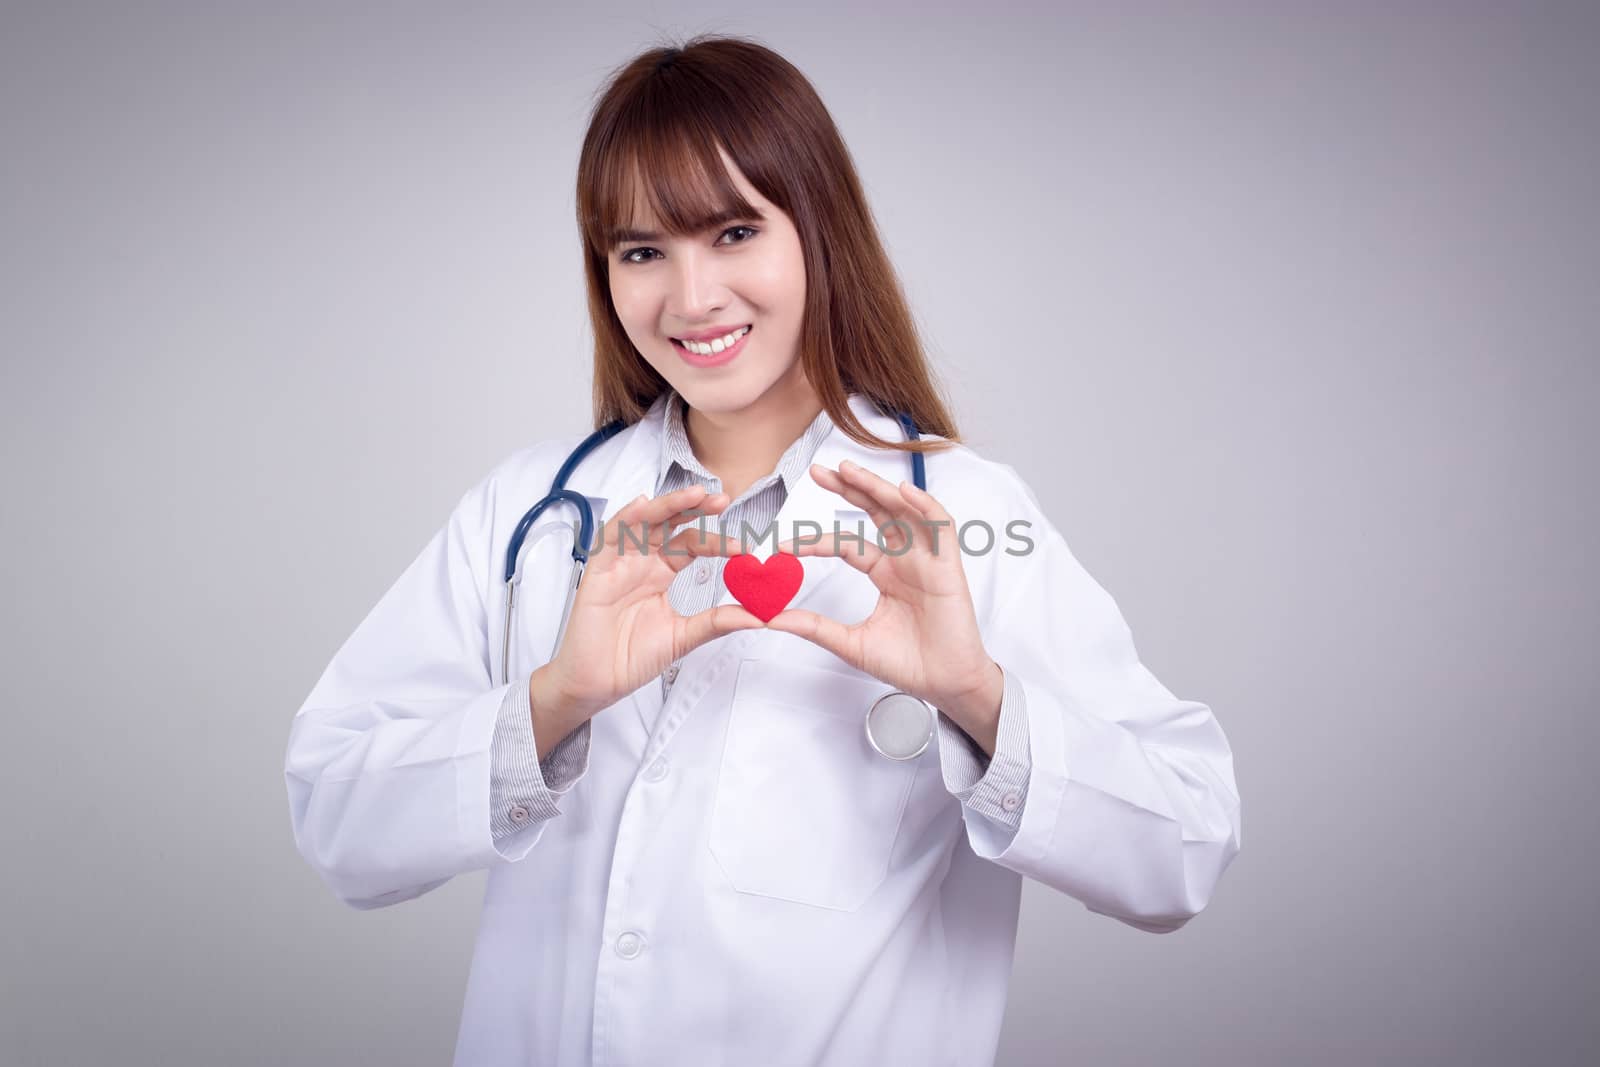 Healthy concept : Young Asian doctor with red heart in hand